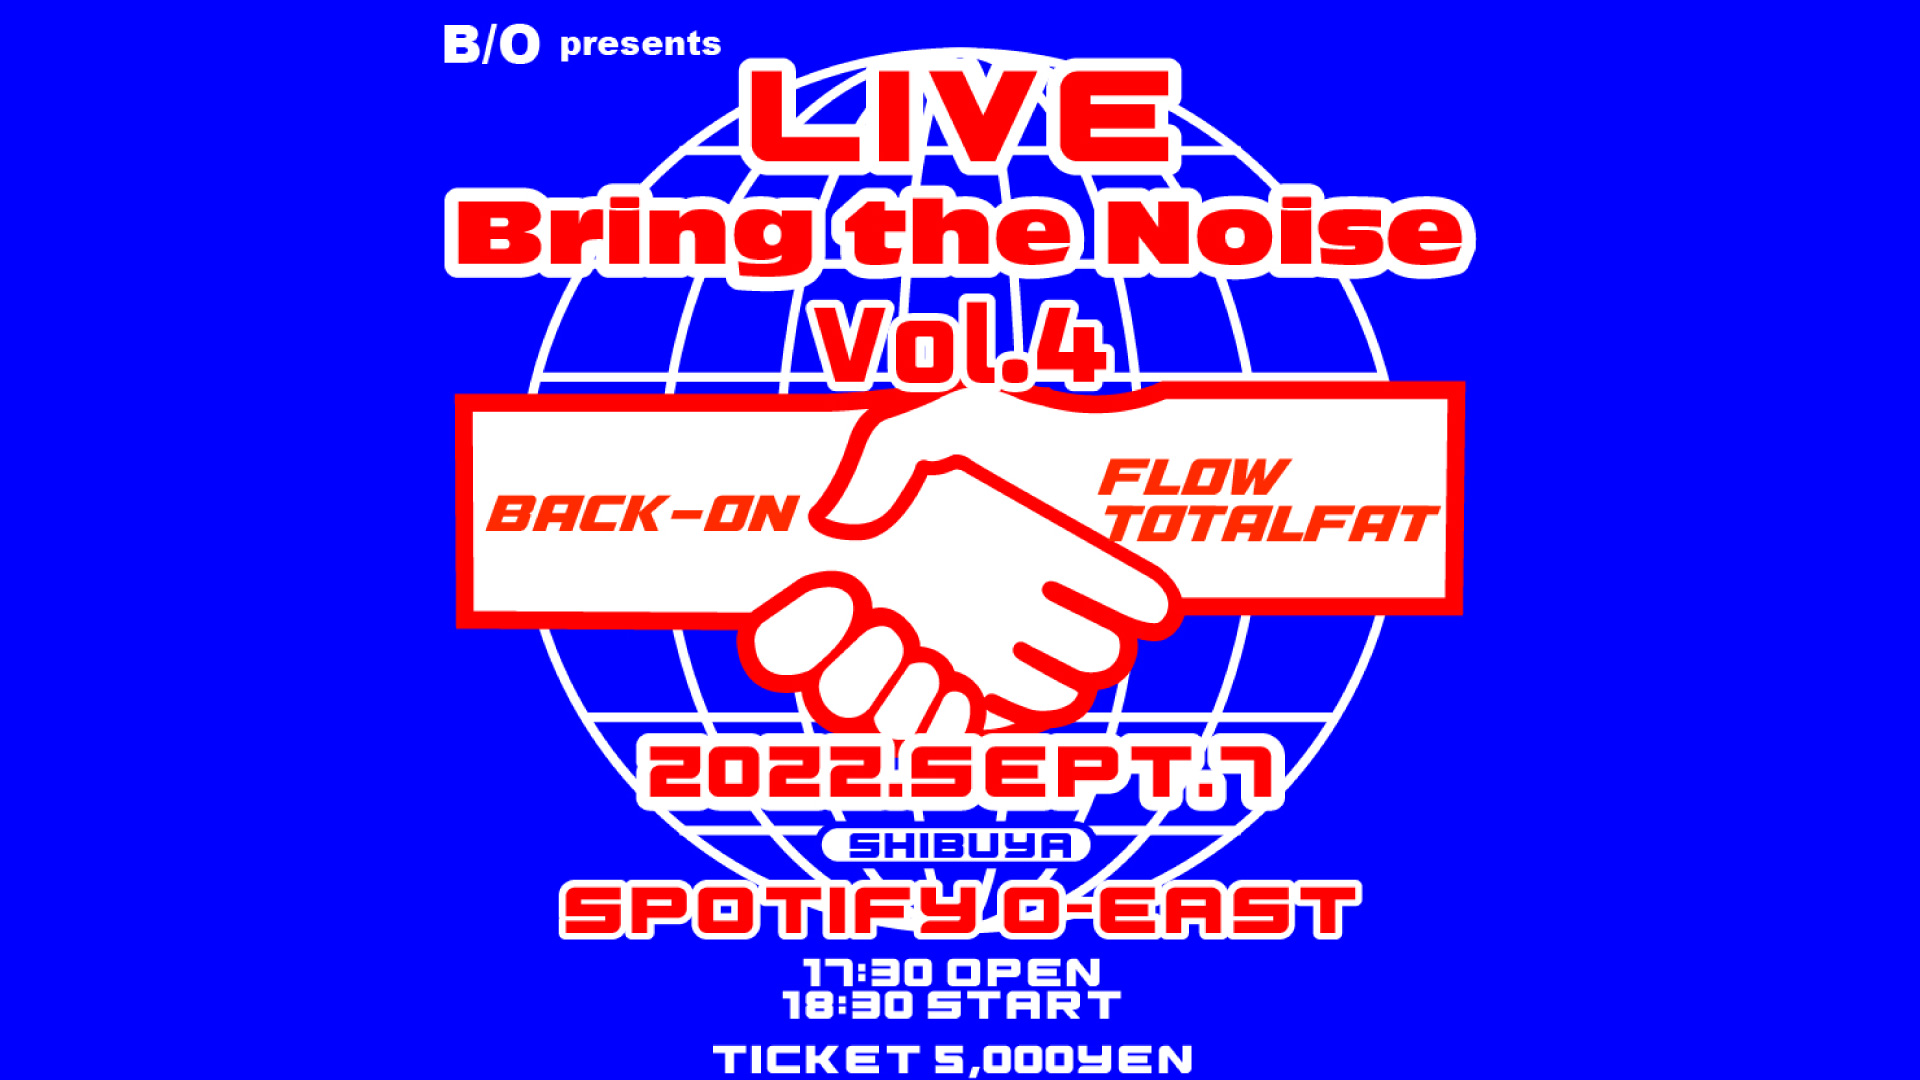 BACK-ON Bring the Noise Vol.4